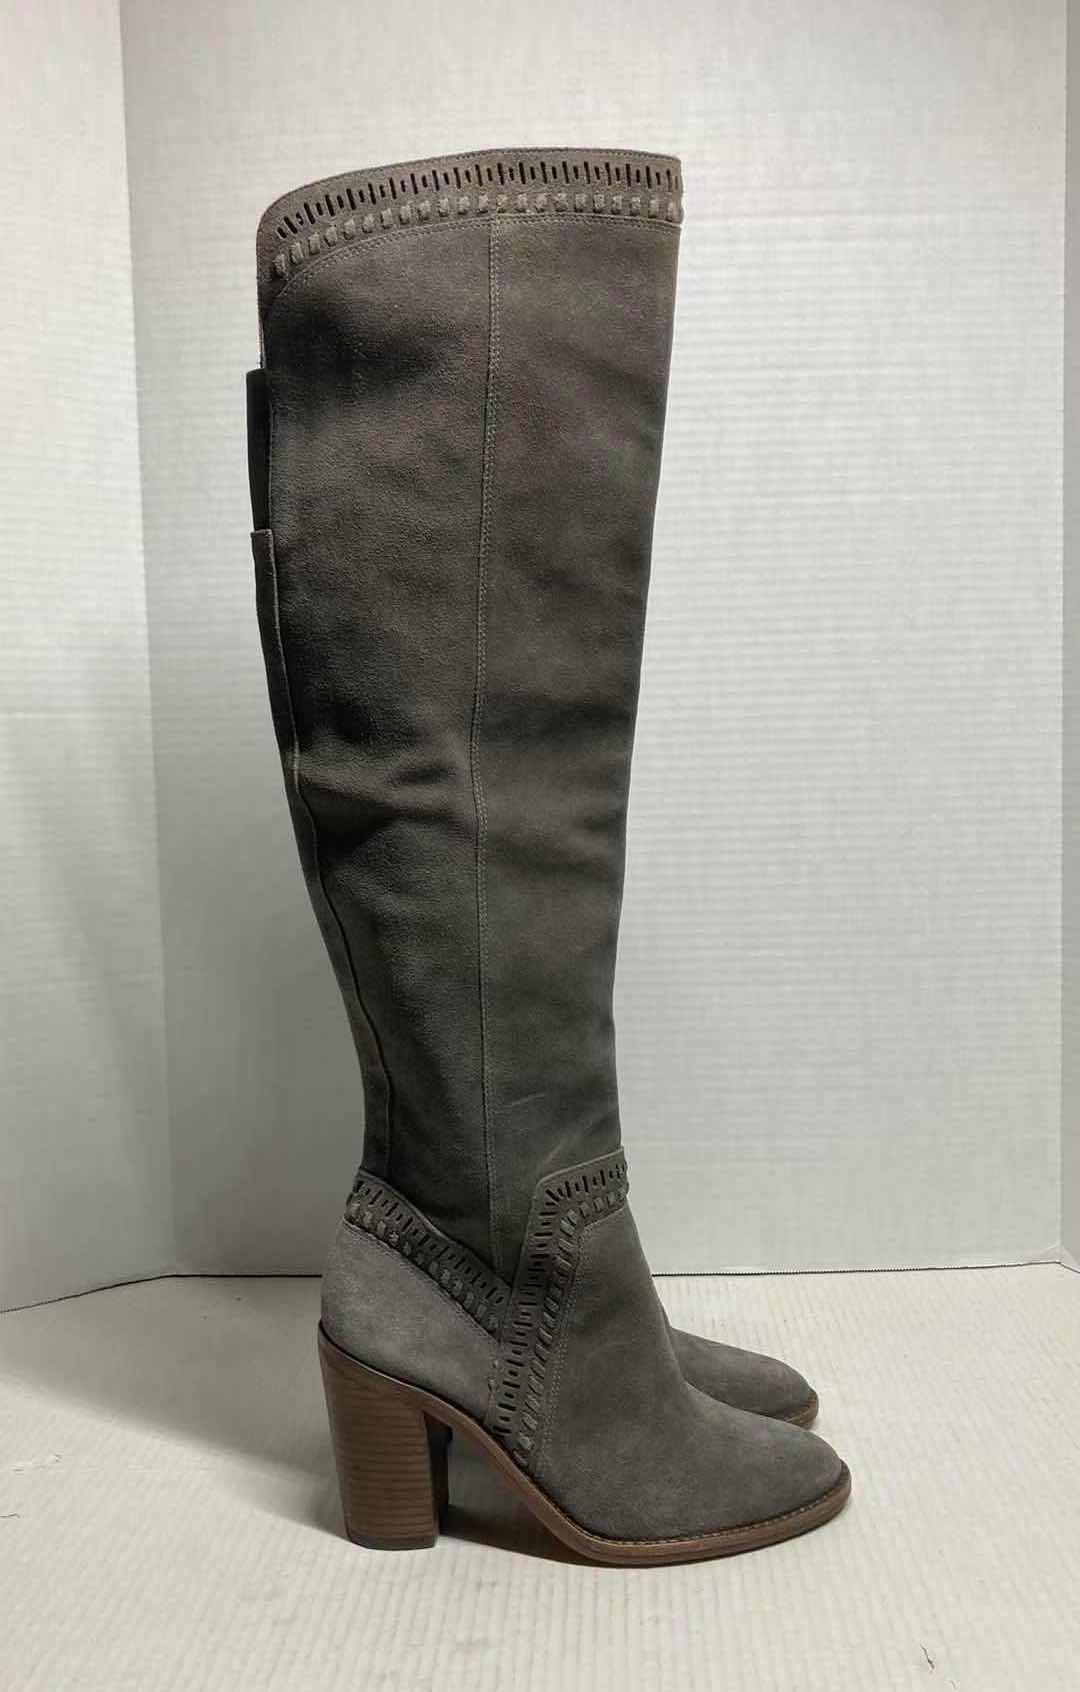 Photo 5 of VINCE CAMUTO BROWN TAUPE SUEDE OVER THE KNEE LEATHER BLOCK HEEL BOOTS WOMAN’S SIZE 9M